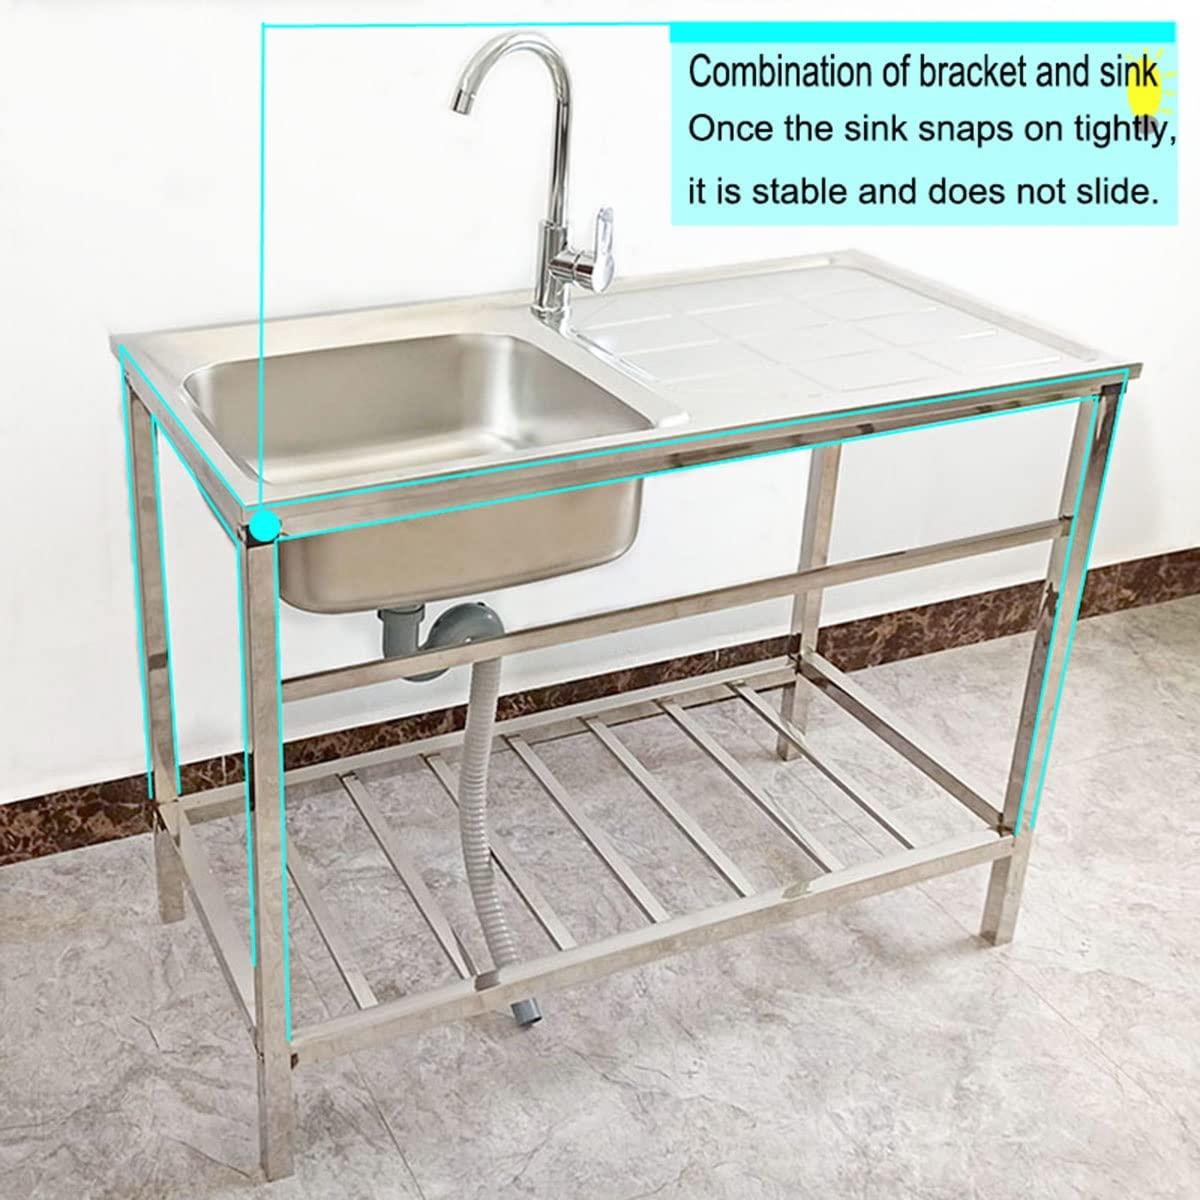 MELPIS 30 Inch Silver Freestanding Kitchen Sink - Stainless Steel Single Bowl Sinks for Indoor Outdoor, Utility Laundry Washing Hand Basin w/Workbench & Faucet, Heavy Duty Sink - CookCave